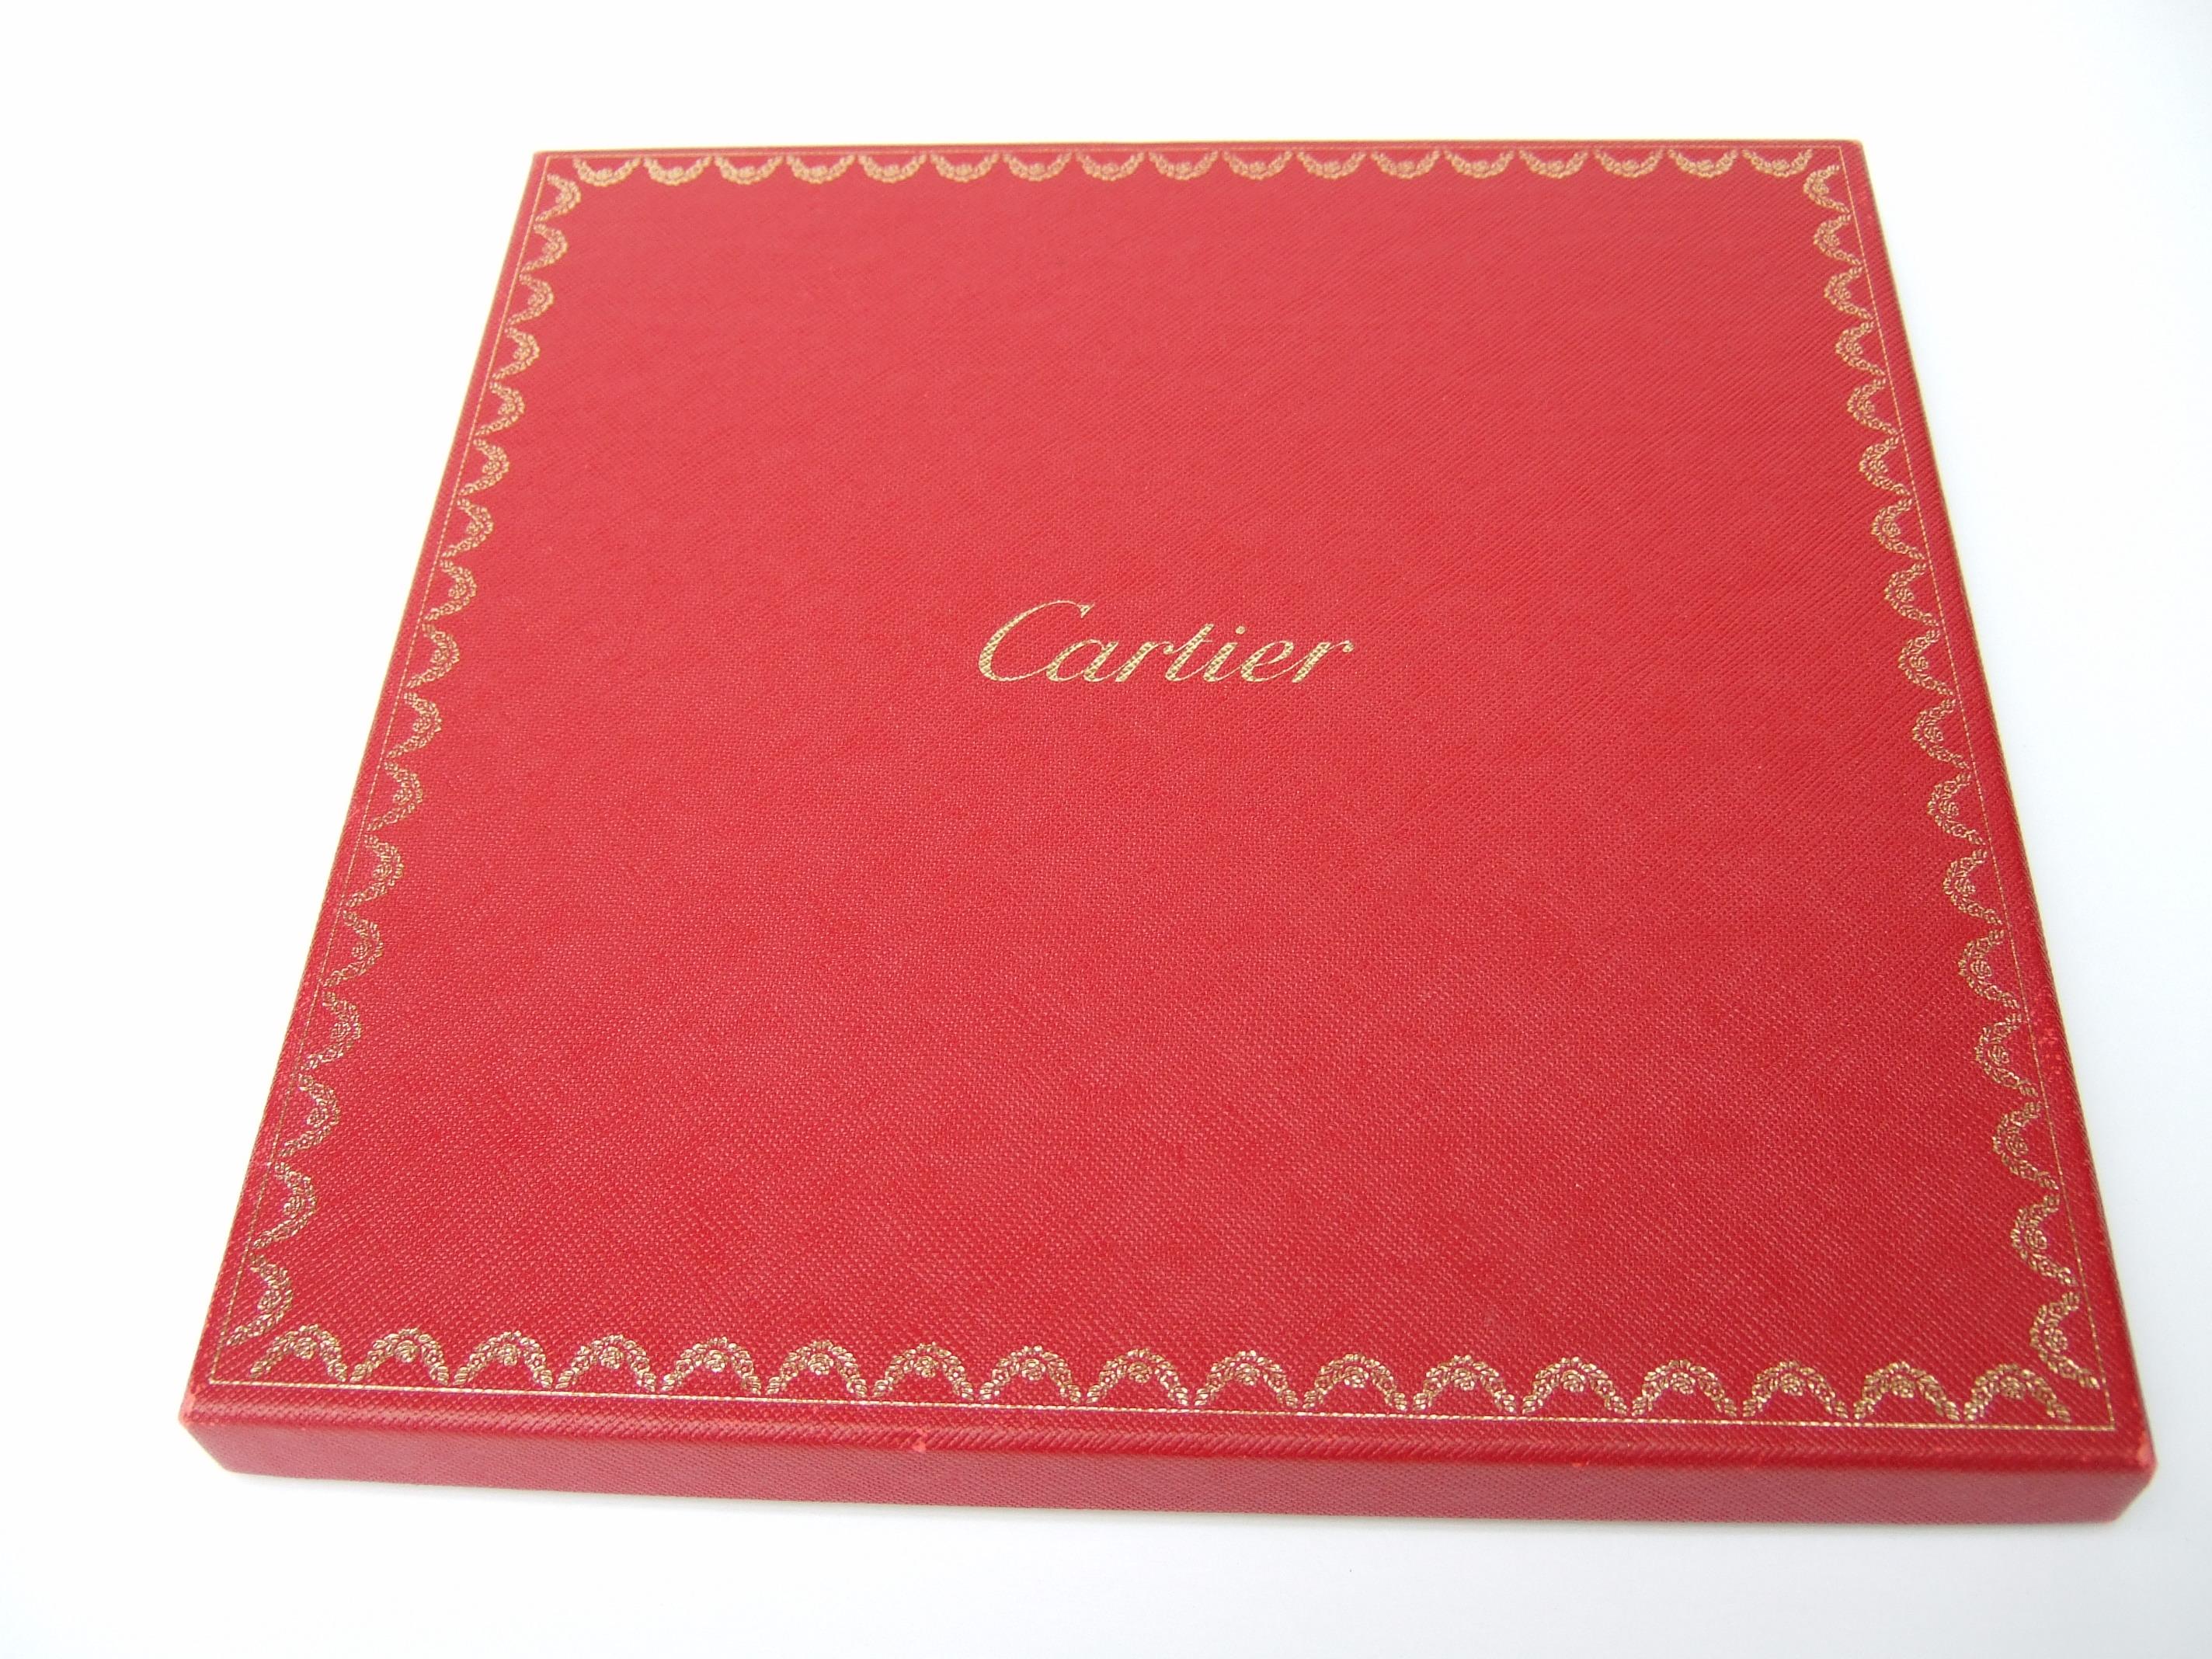 Cartier Paris Silk Panther Hand Rolled Scarf in Cartier Box c 1990s 32 x 34  For Sale 9